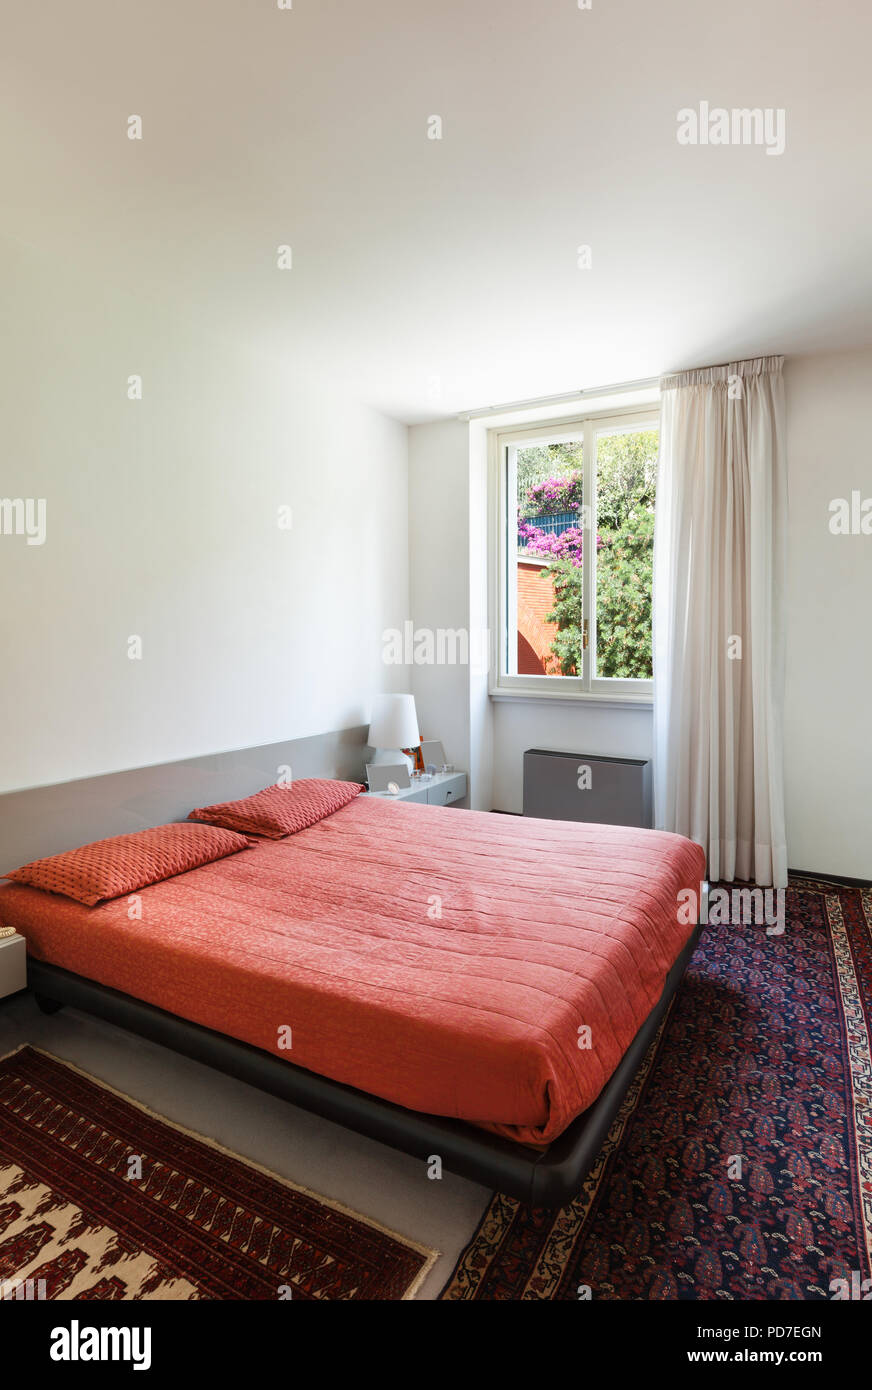 nice bedroom of a house, interior Stock Photo